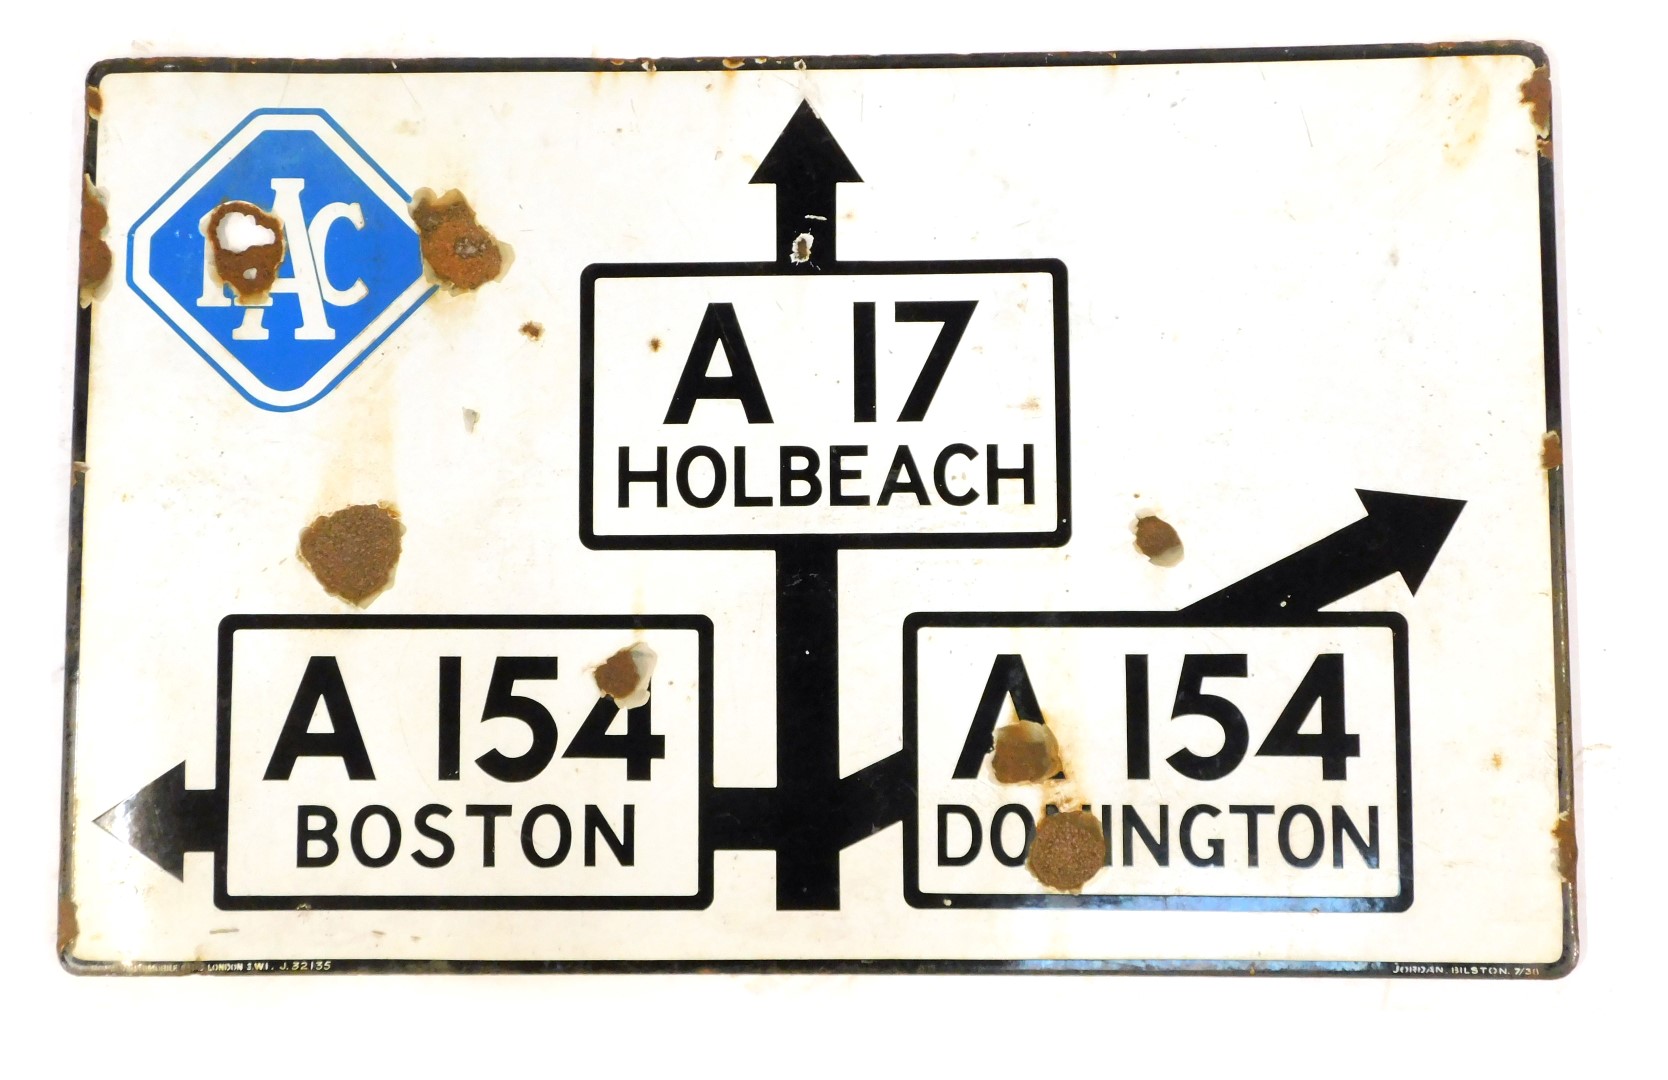 An RAC enamel road sign, for the split division between the A17 Holbech A154 Boston A154 Donington,